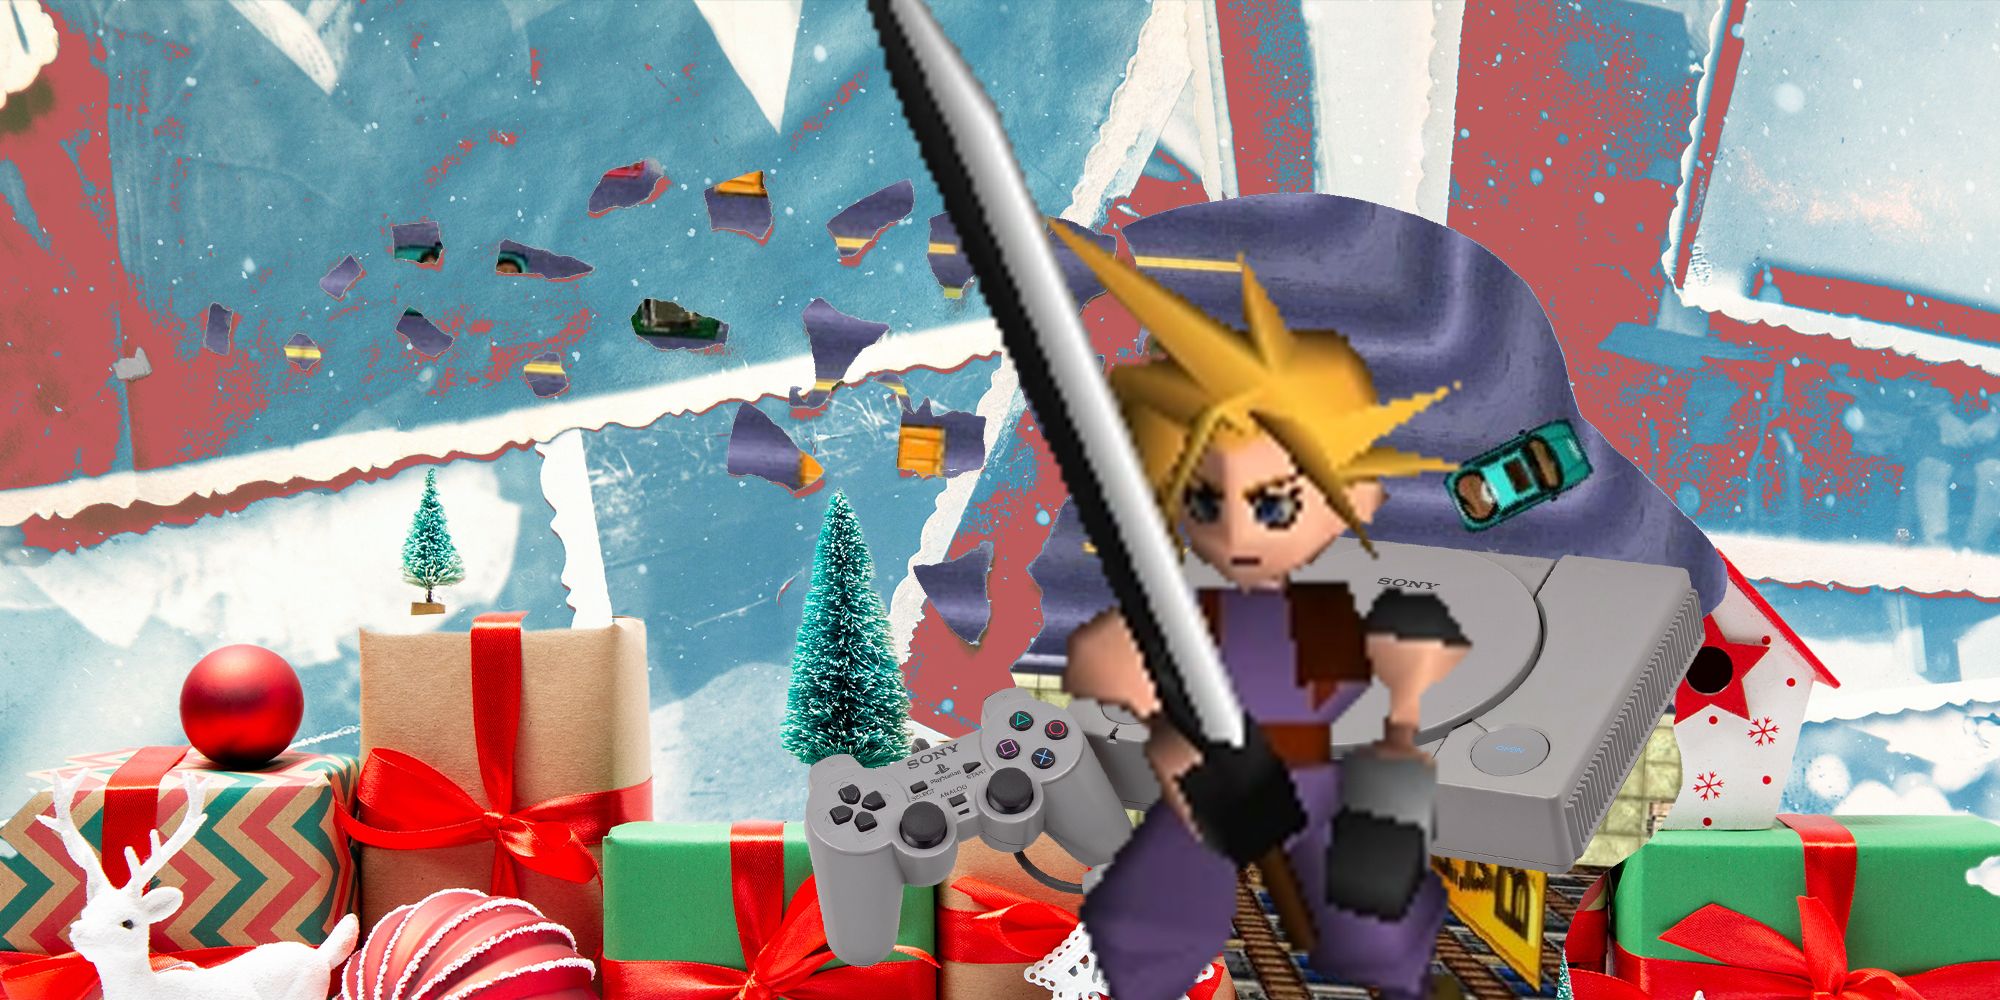 A Christmas-themed image with presents in the background, a PlayStation 1 console, a screenshot from GTA 1, and Cloud Strife holding the Buster Sword